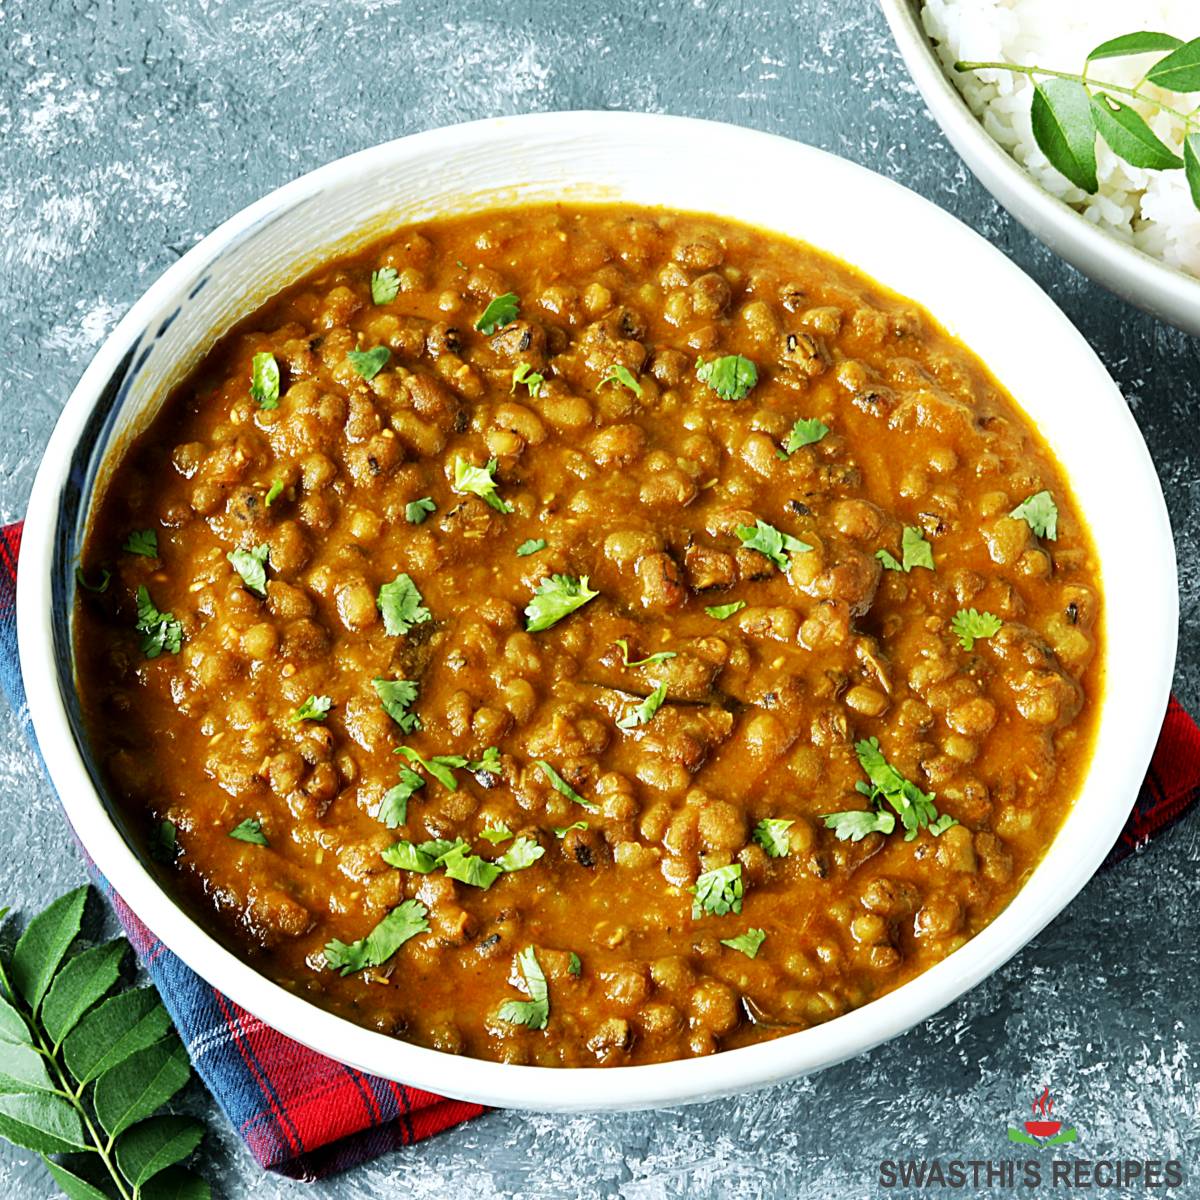 Green moong dal recipe made with green gram dal